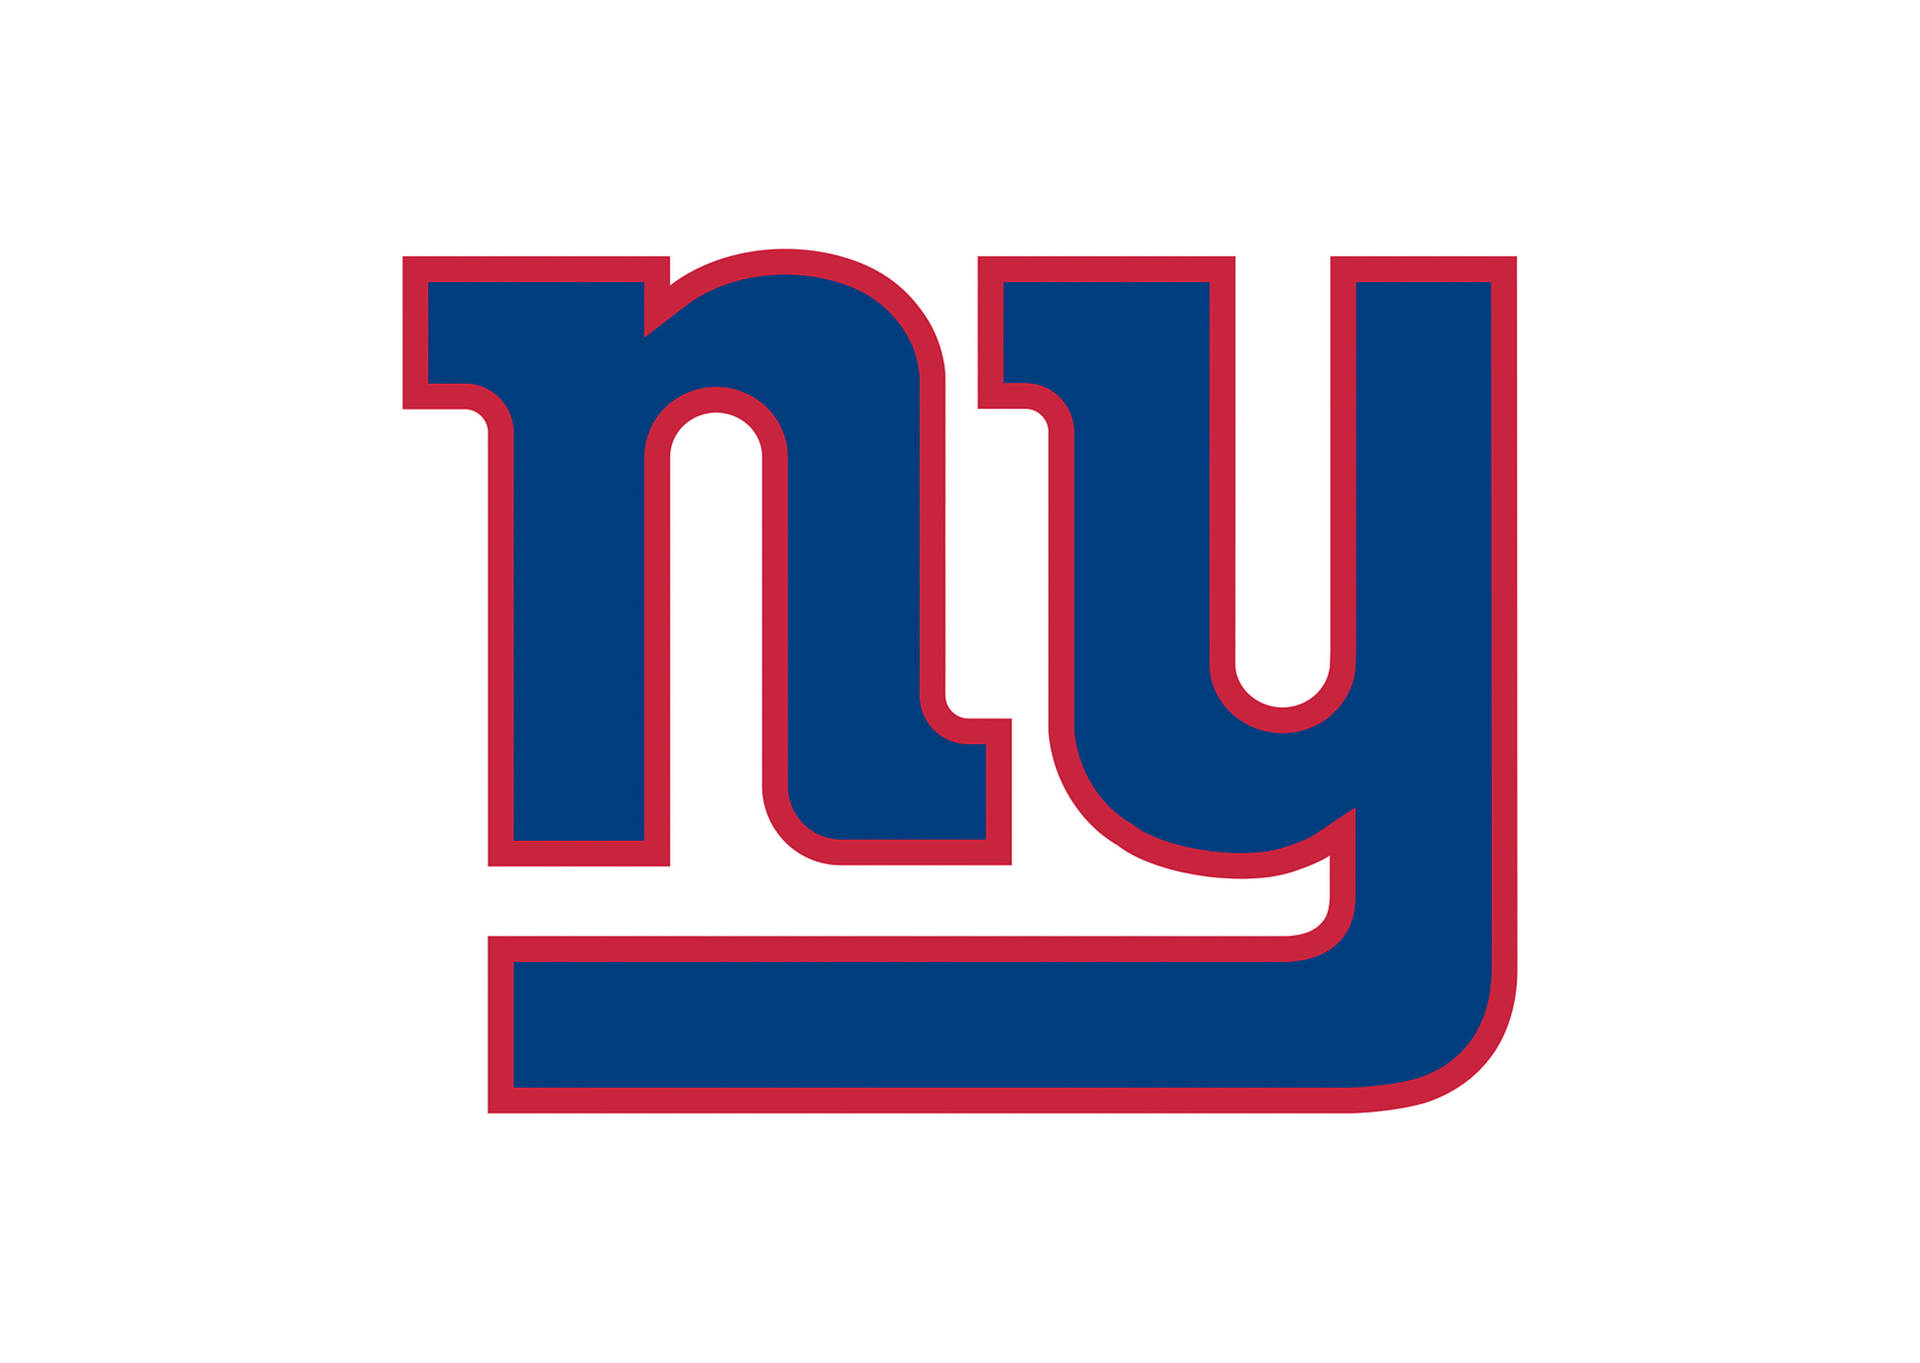 New York Giants 4225X3000 Wallpaper and Background Image